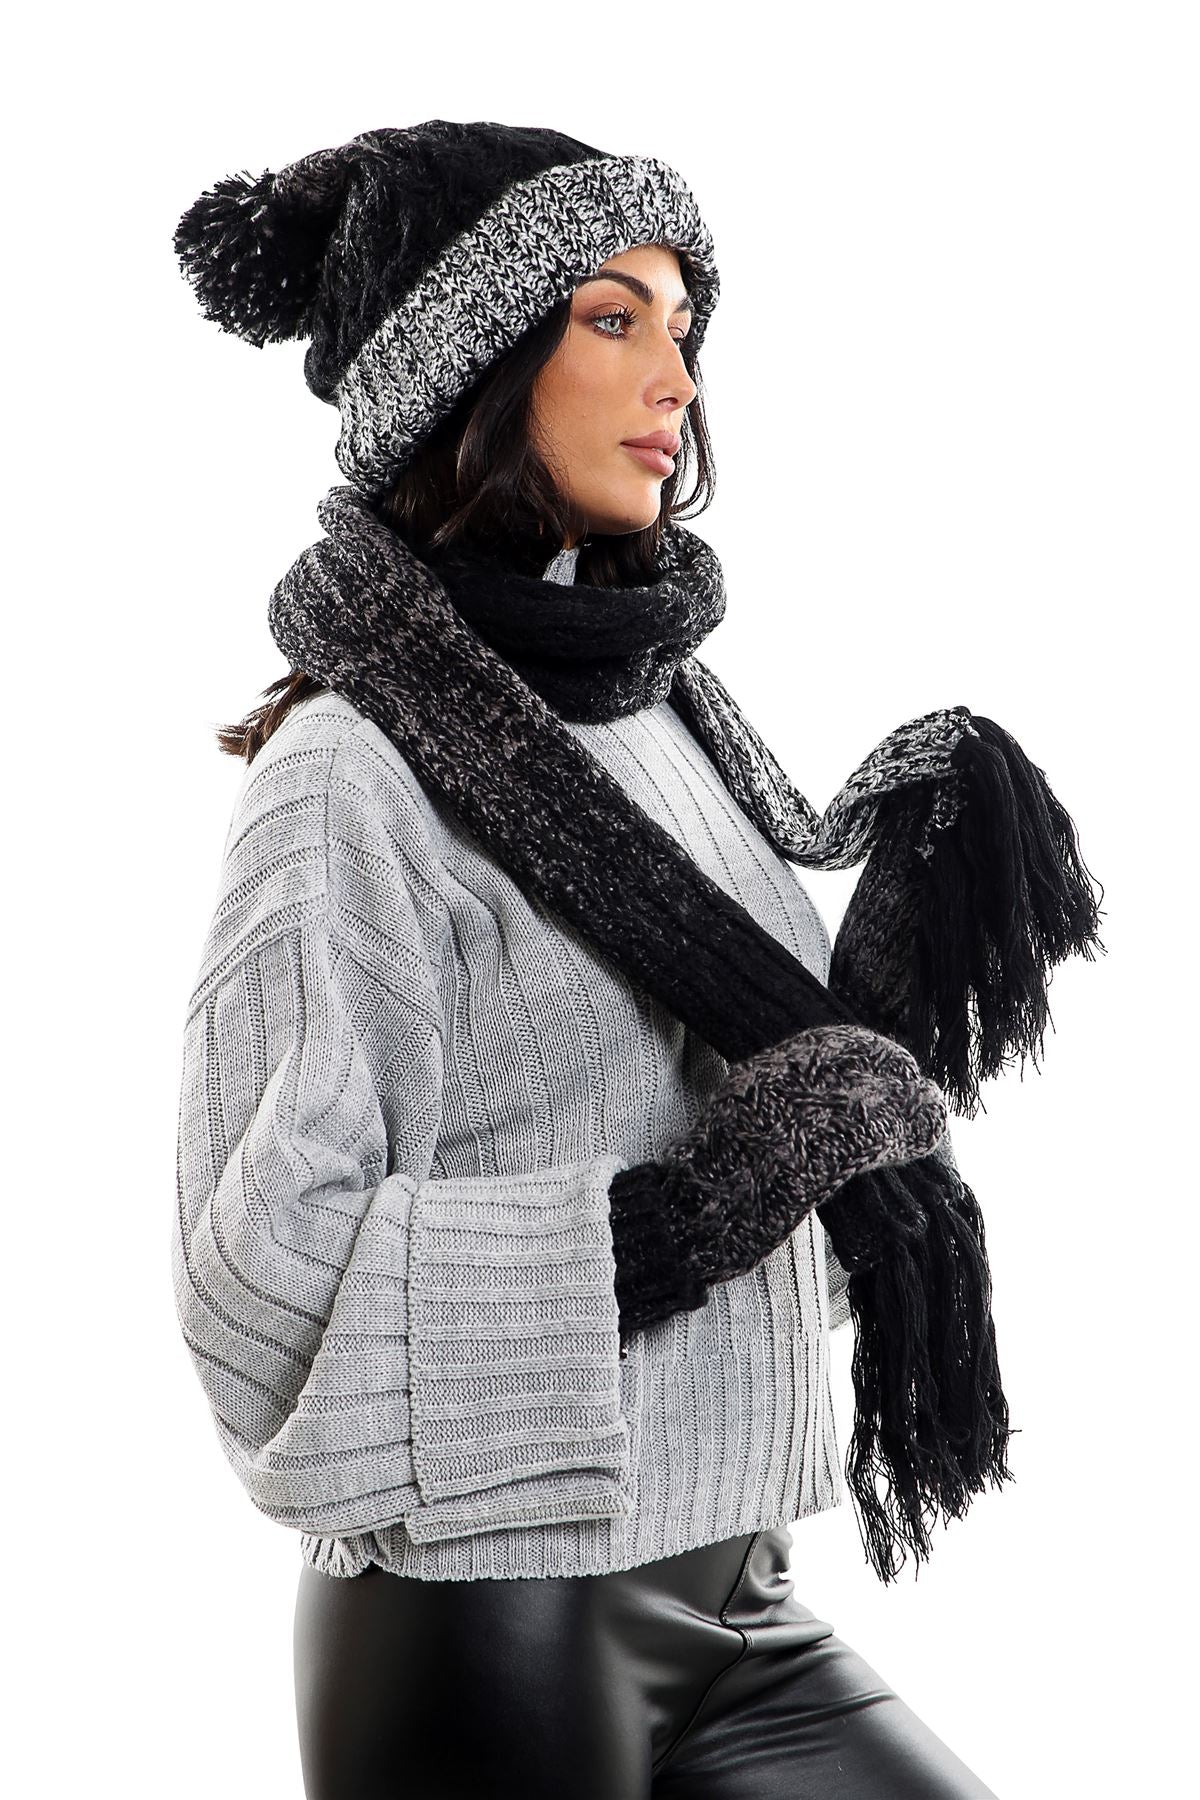 Wooly Thick knitted Hat, Scarf and Glove